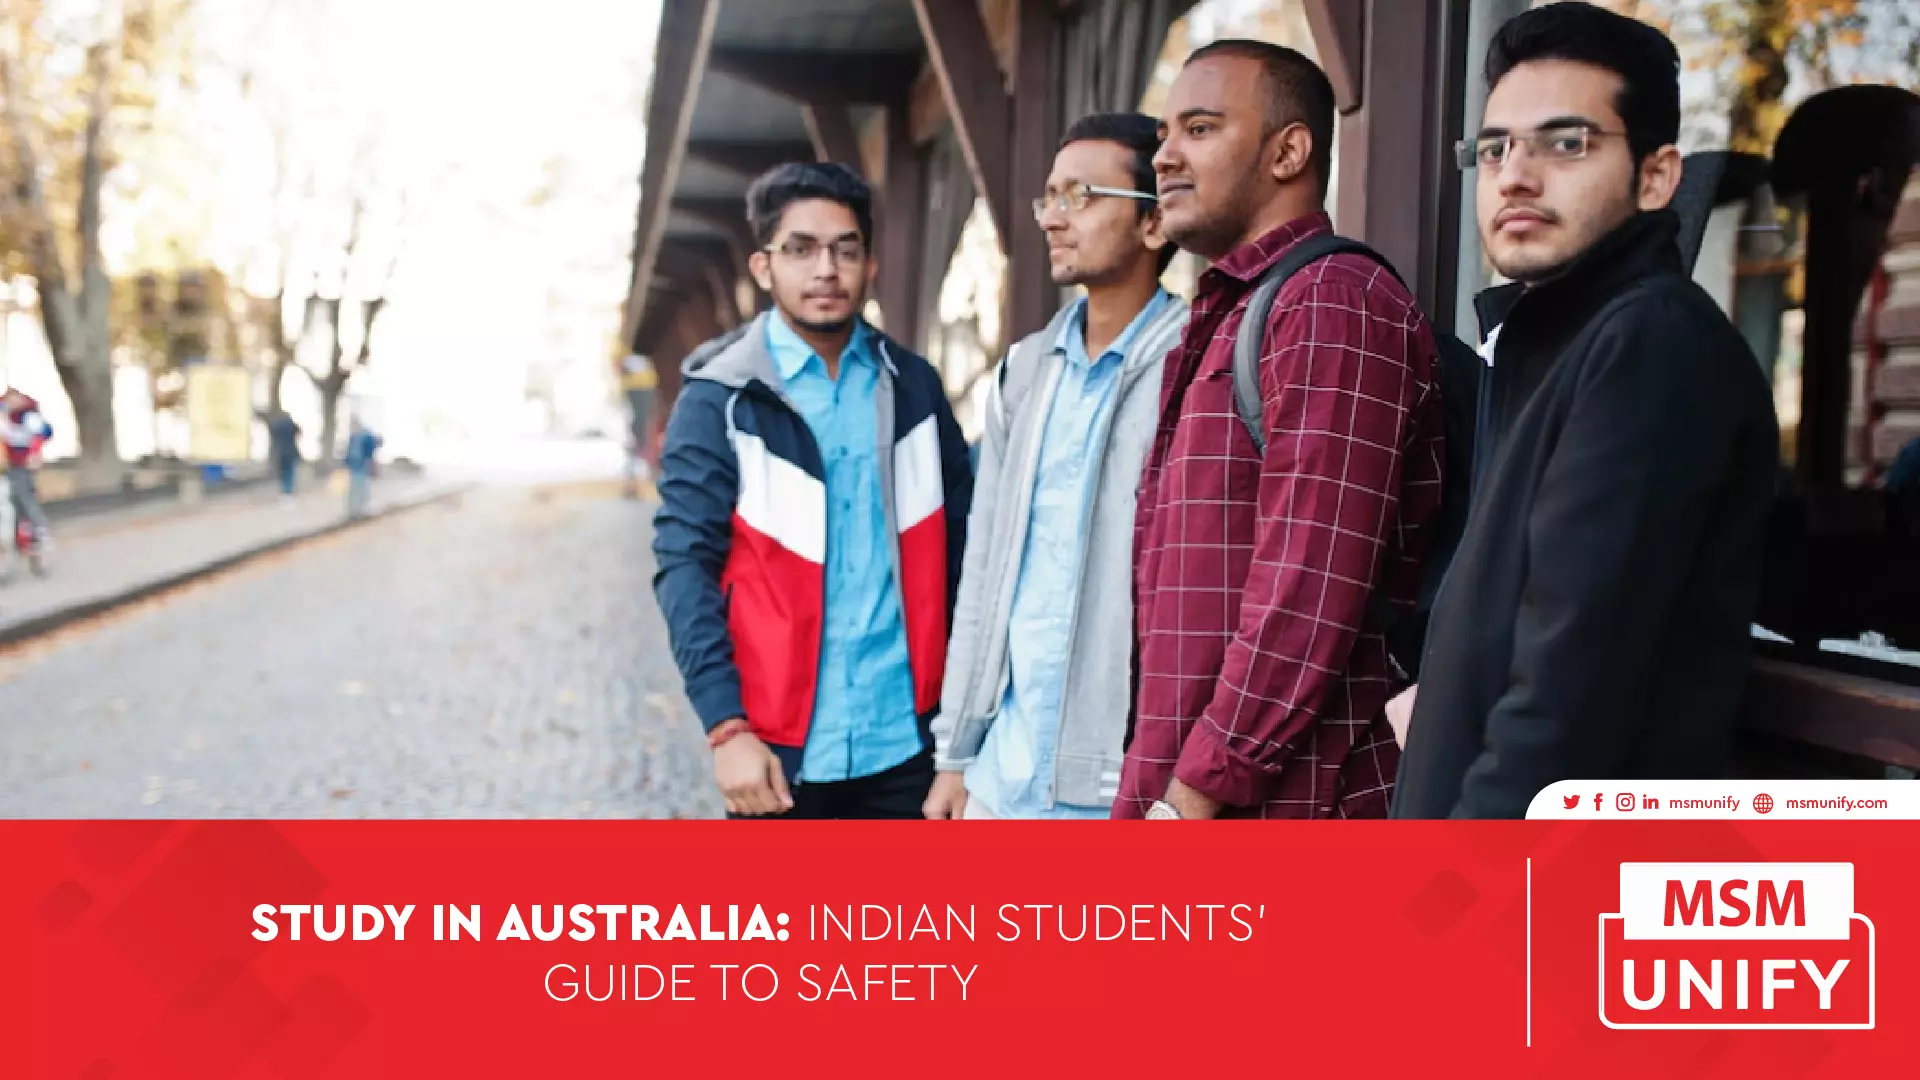 121622 MSM Unify Study in Australia Indian Students Guide to Safety 01